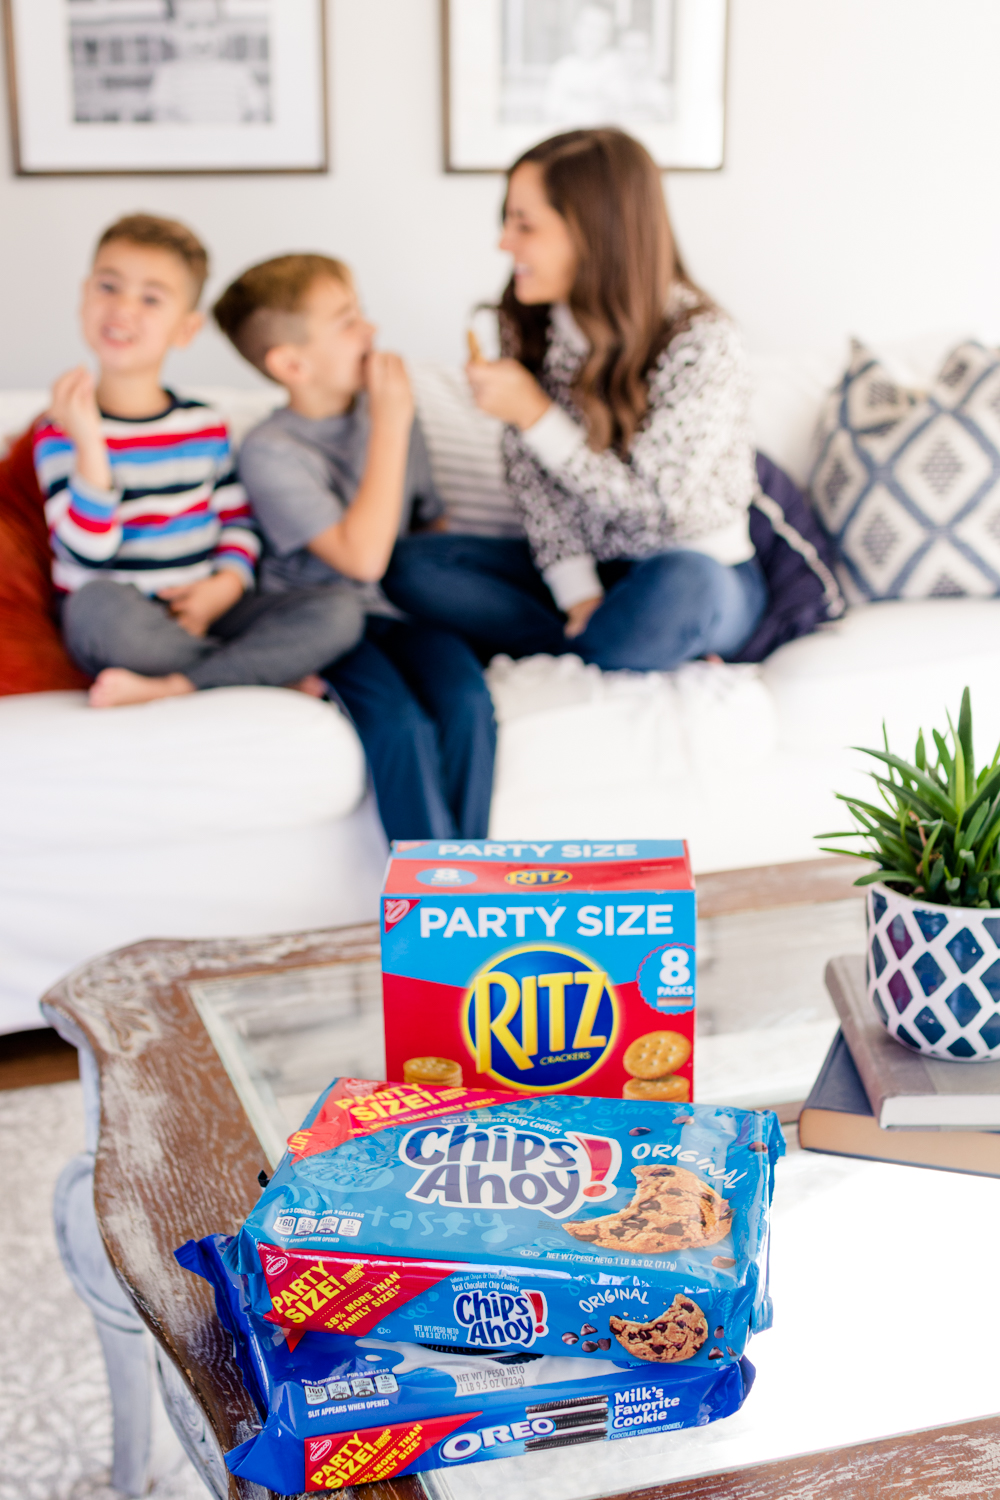 Pick your party sweepstakes from Nabisco | enter to win a trip to one of four fabulous parties with party size packs of RITZ OREO or Chips Ahoy! at Walmart